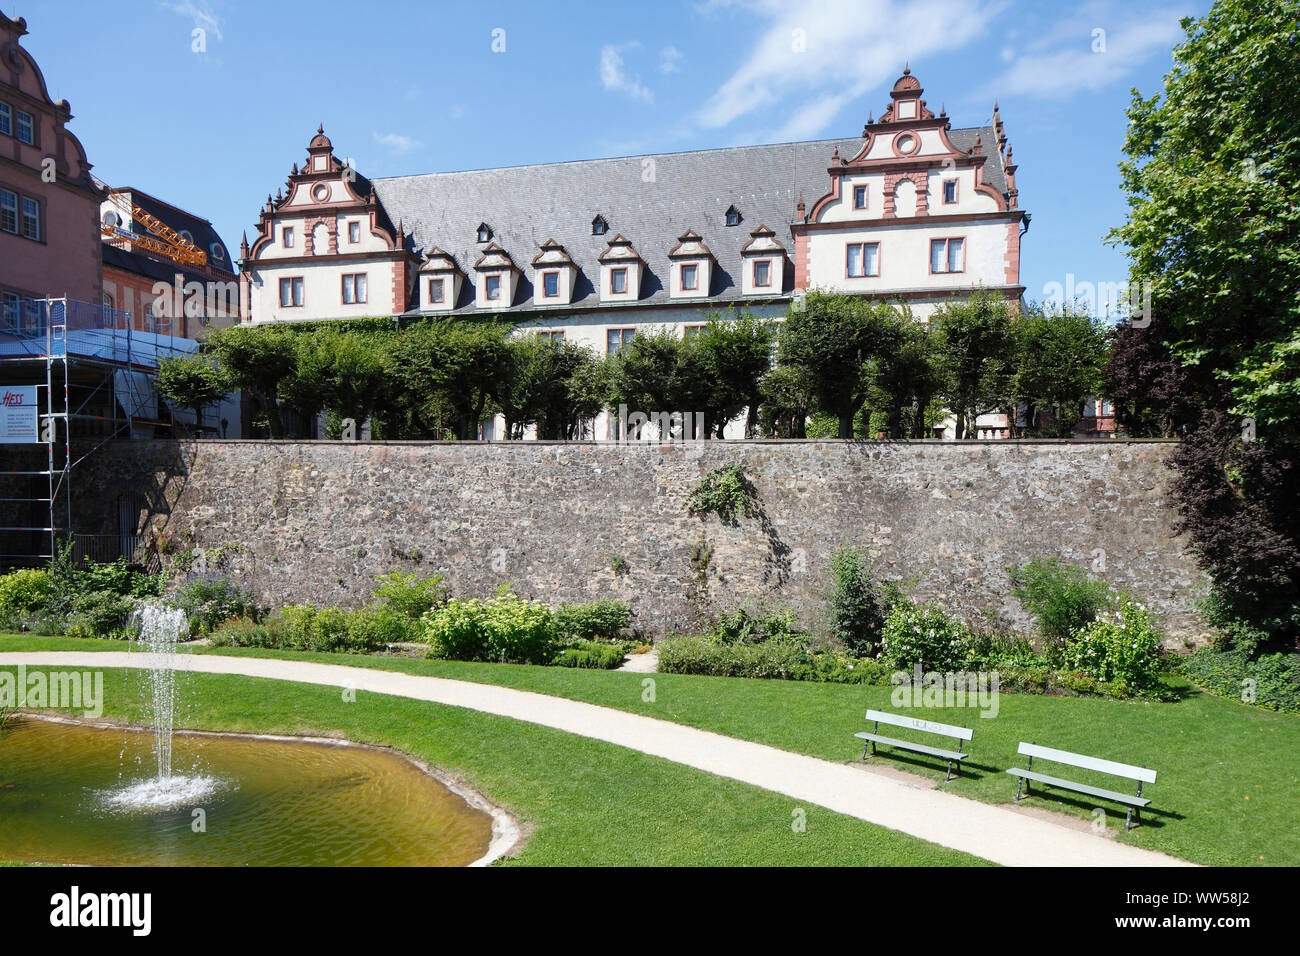 Moat with Darmstadt castle, today part of the University of Technology of Darmstadt, TU Darmstadt, Darmstadt, Hesse, Germany, Europe Stock Photo